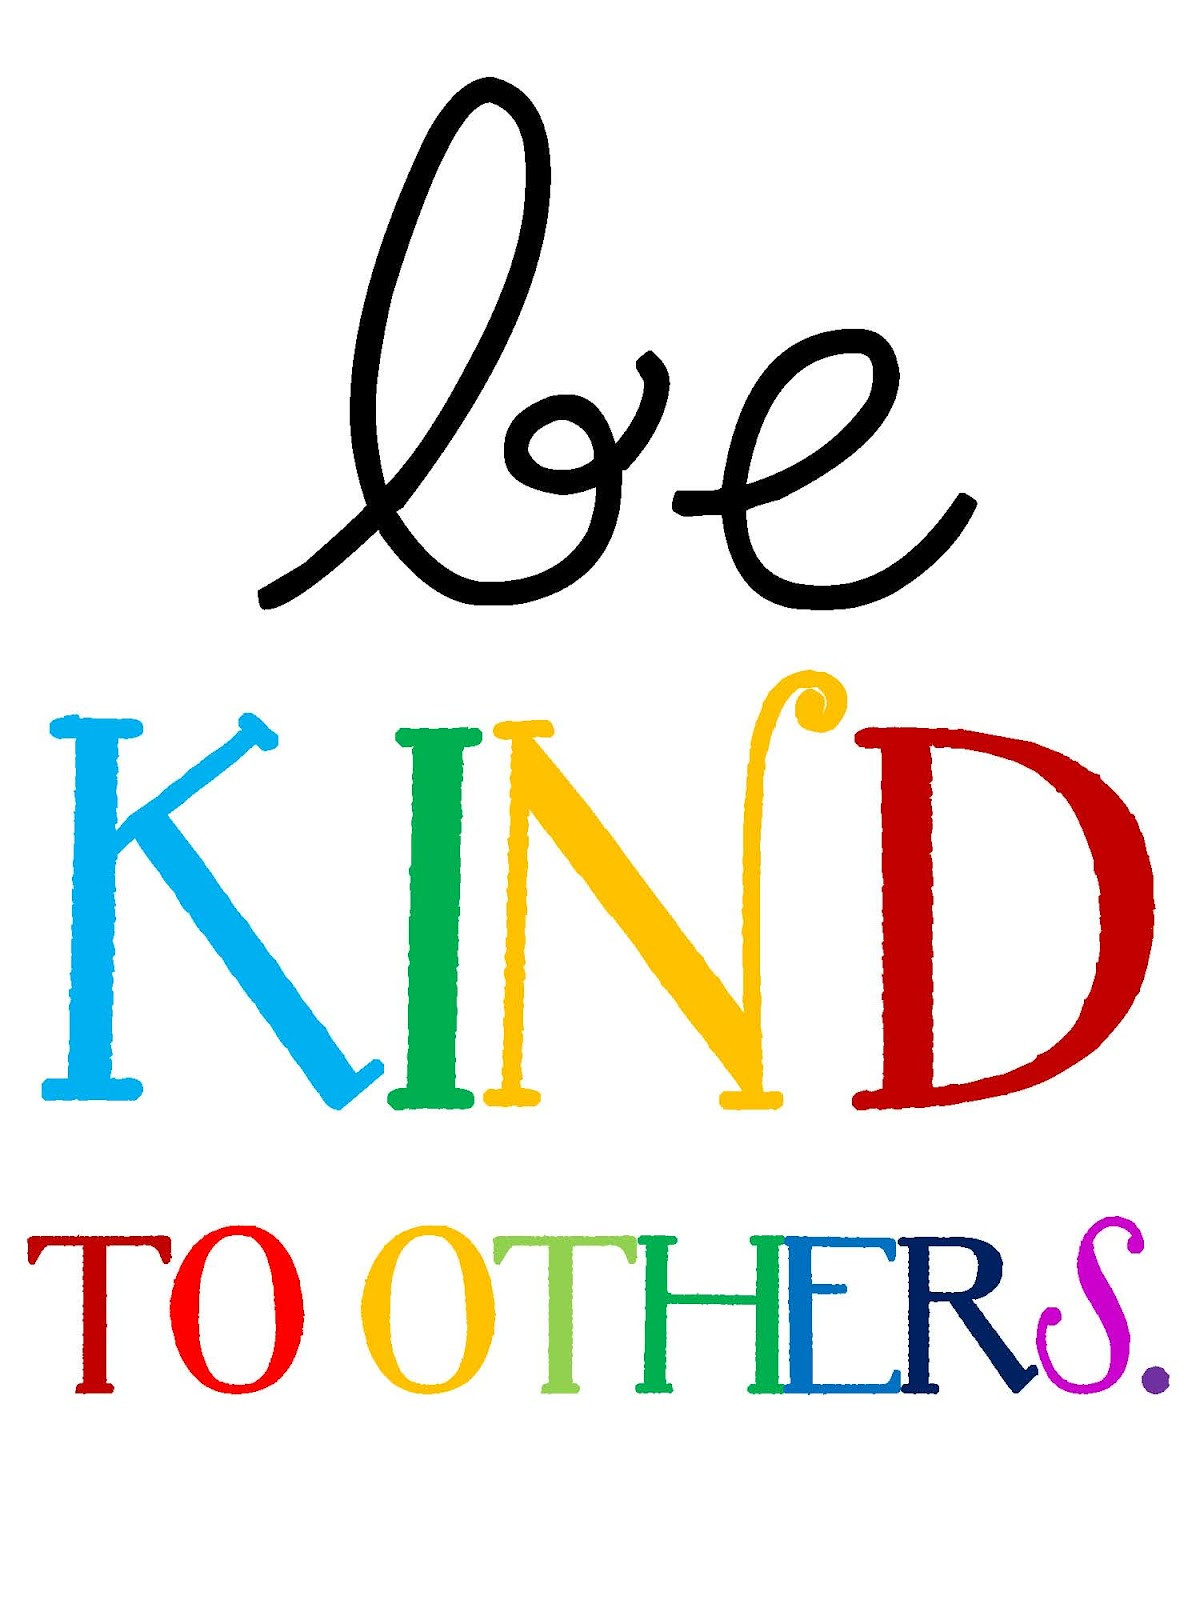 Kind Quotes For Kids
 “Be Kind to Humankind Week” May Be Ending But the Acts